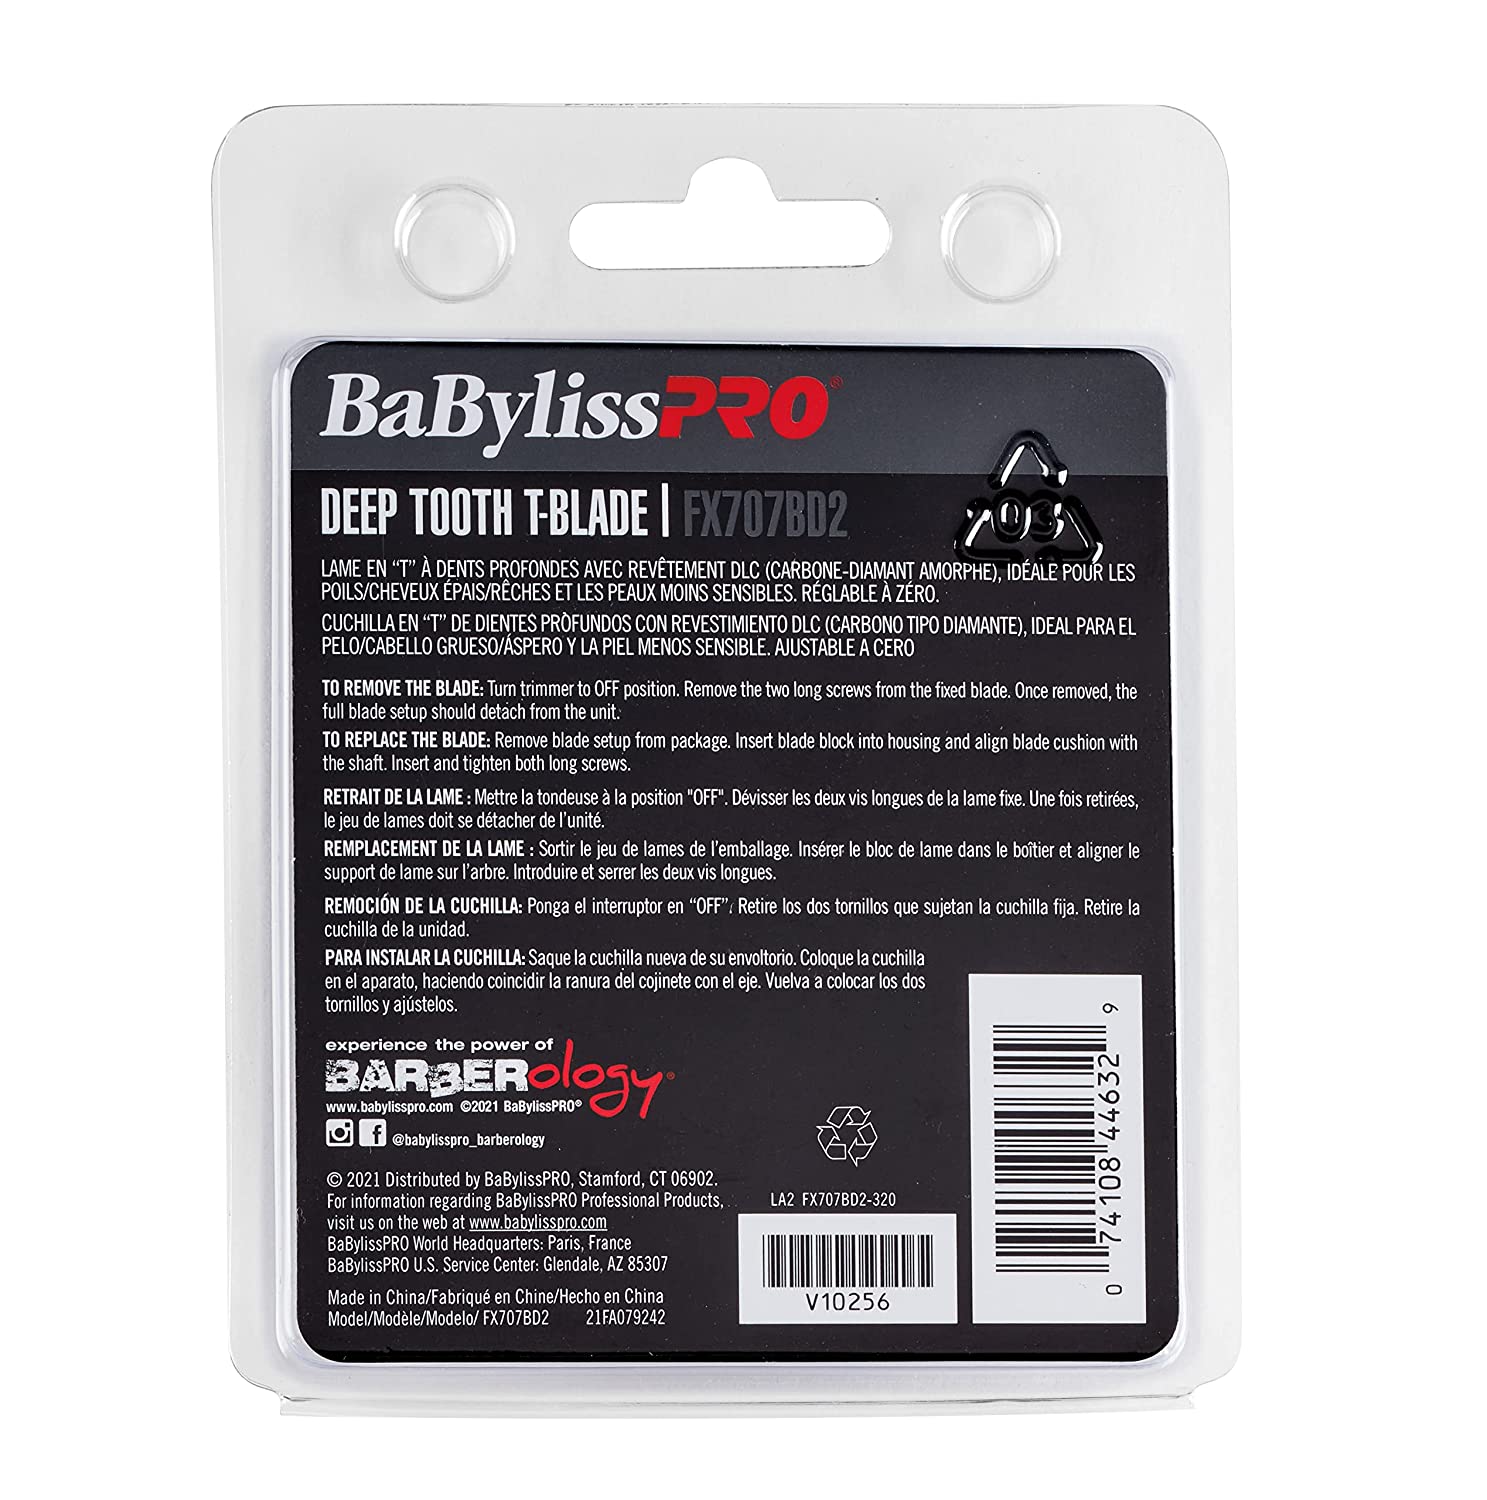 BaBylissPRO Deep Tooth T-Blade Replacement Blade FX707BD2 Back Packaging